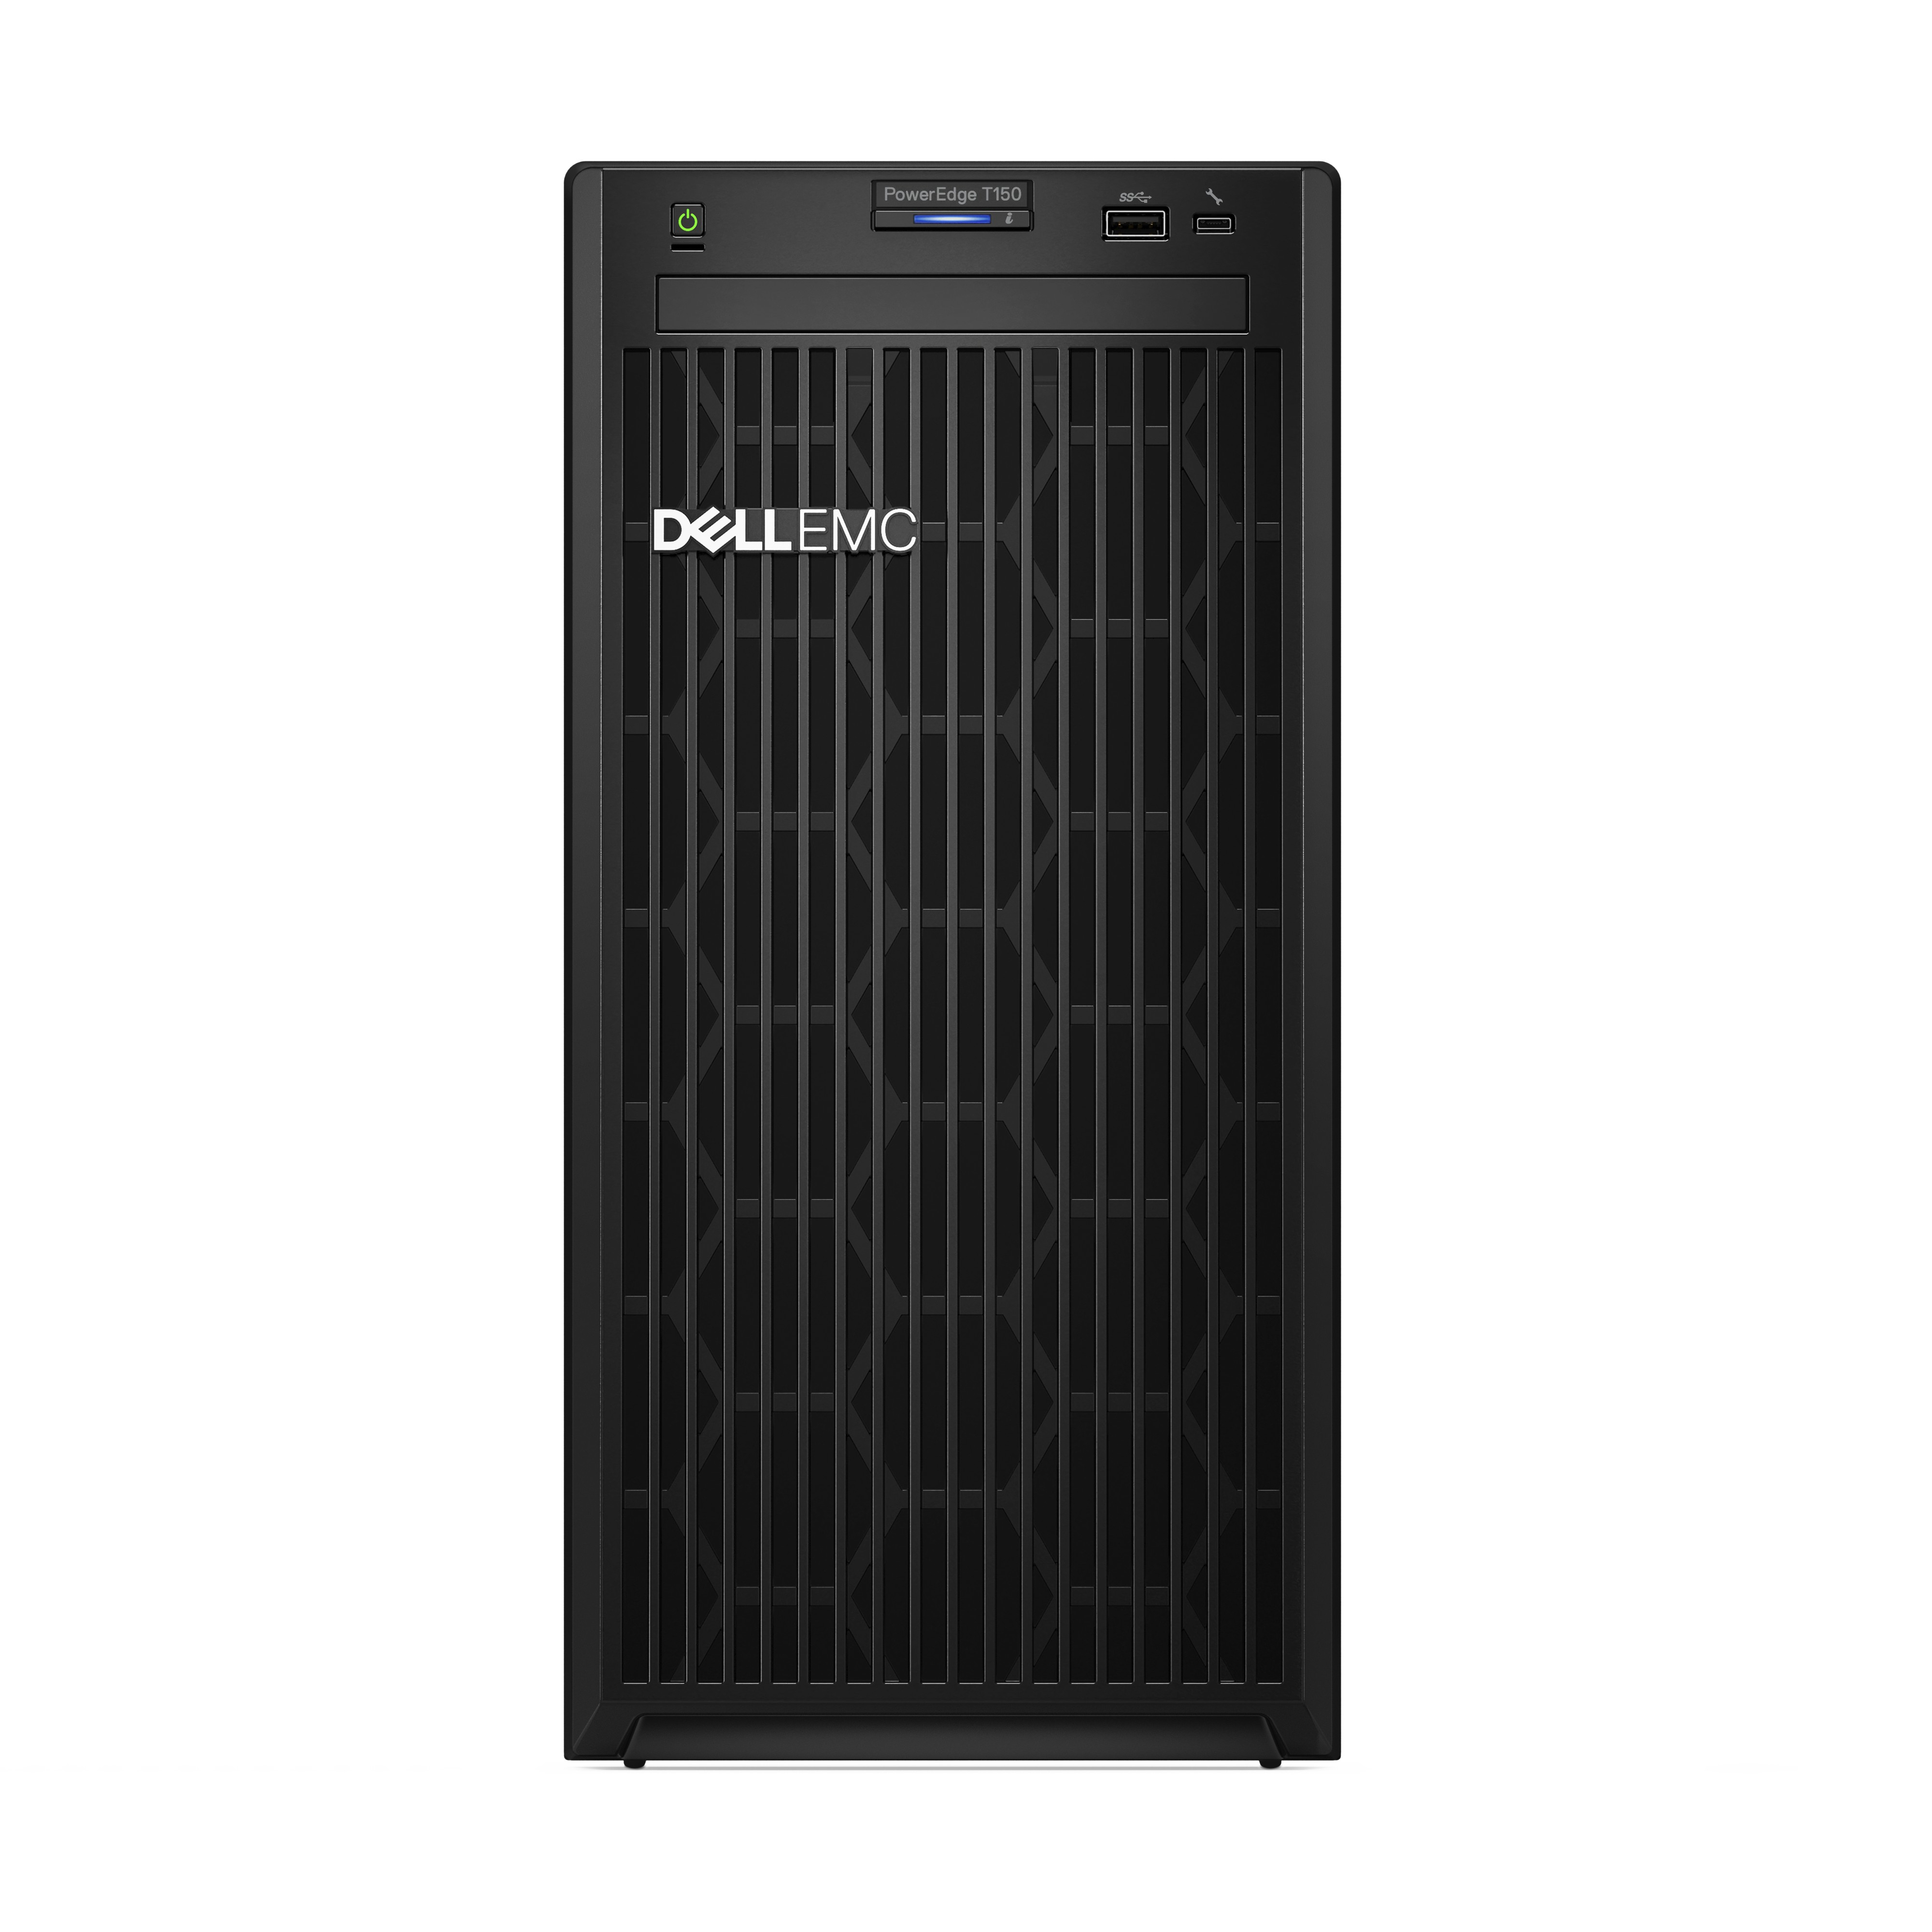 Dell PowerEdge T150 - Server - MT - 1-way - 1 X Pentium Gold G6405T / 3.5 GHz - RAM 8 GB - HDD 1 TB - Matrox G200 - GigE - Monitor: None - Black - With 3 Years Basic Onsite 5KGMM - C2000